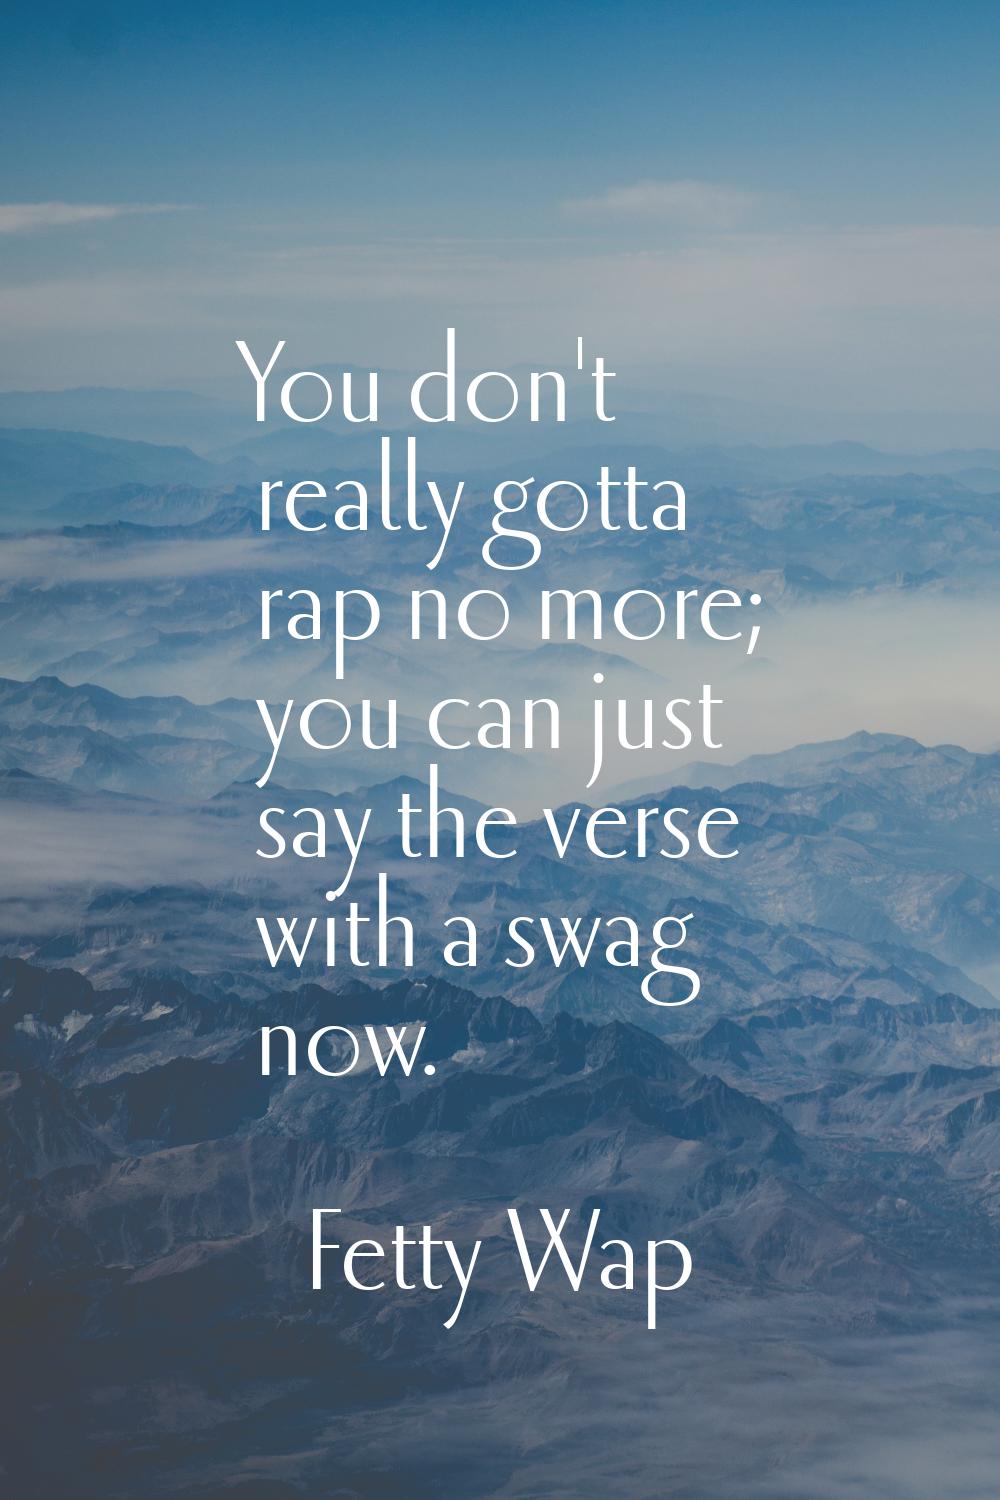 You don't really gotta rap no more; you can just say the verse with a swag now.